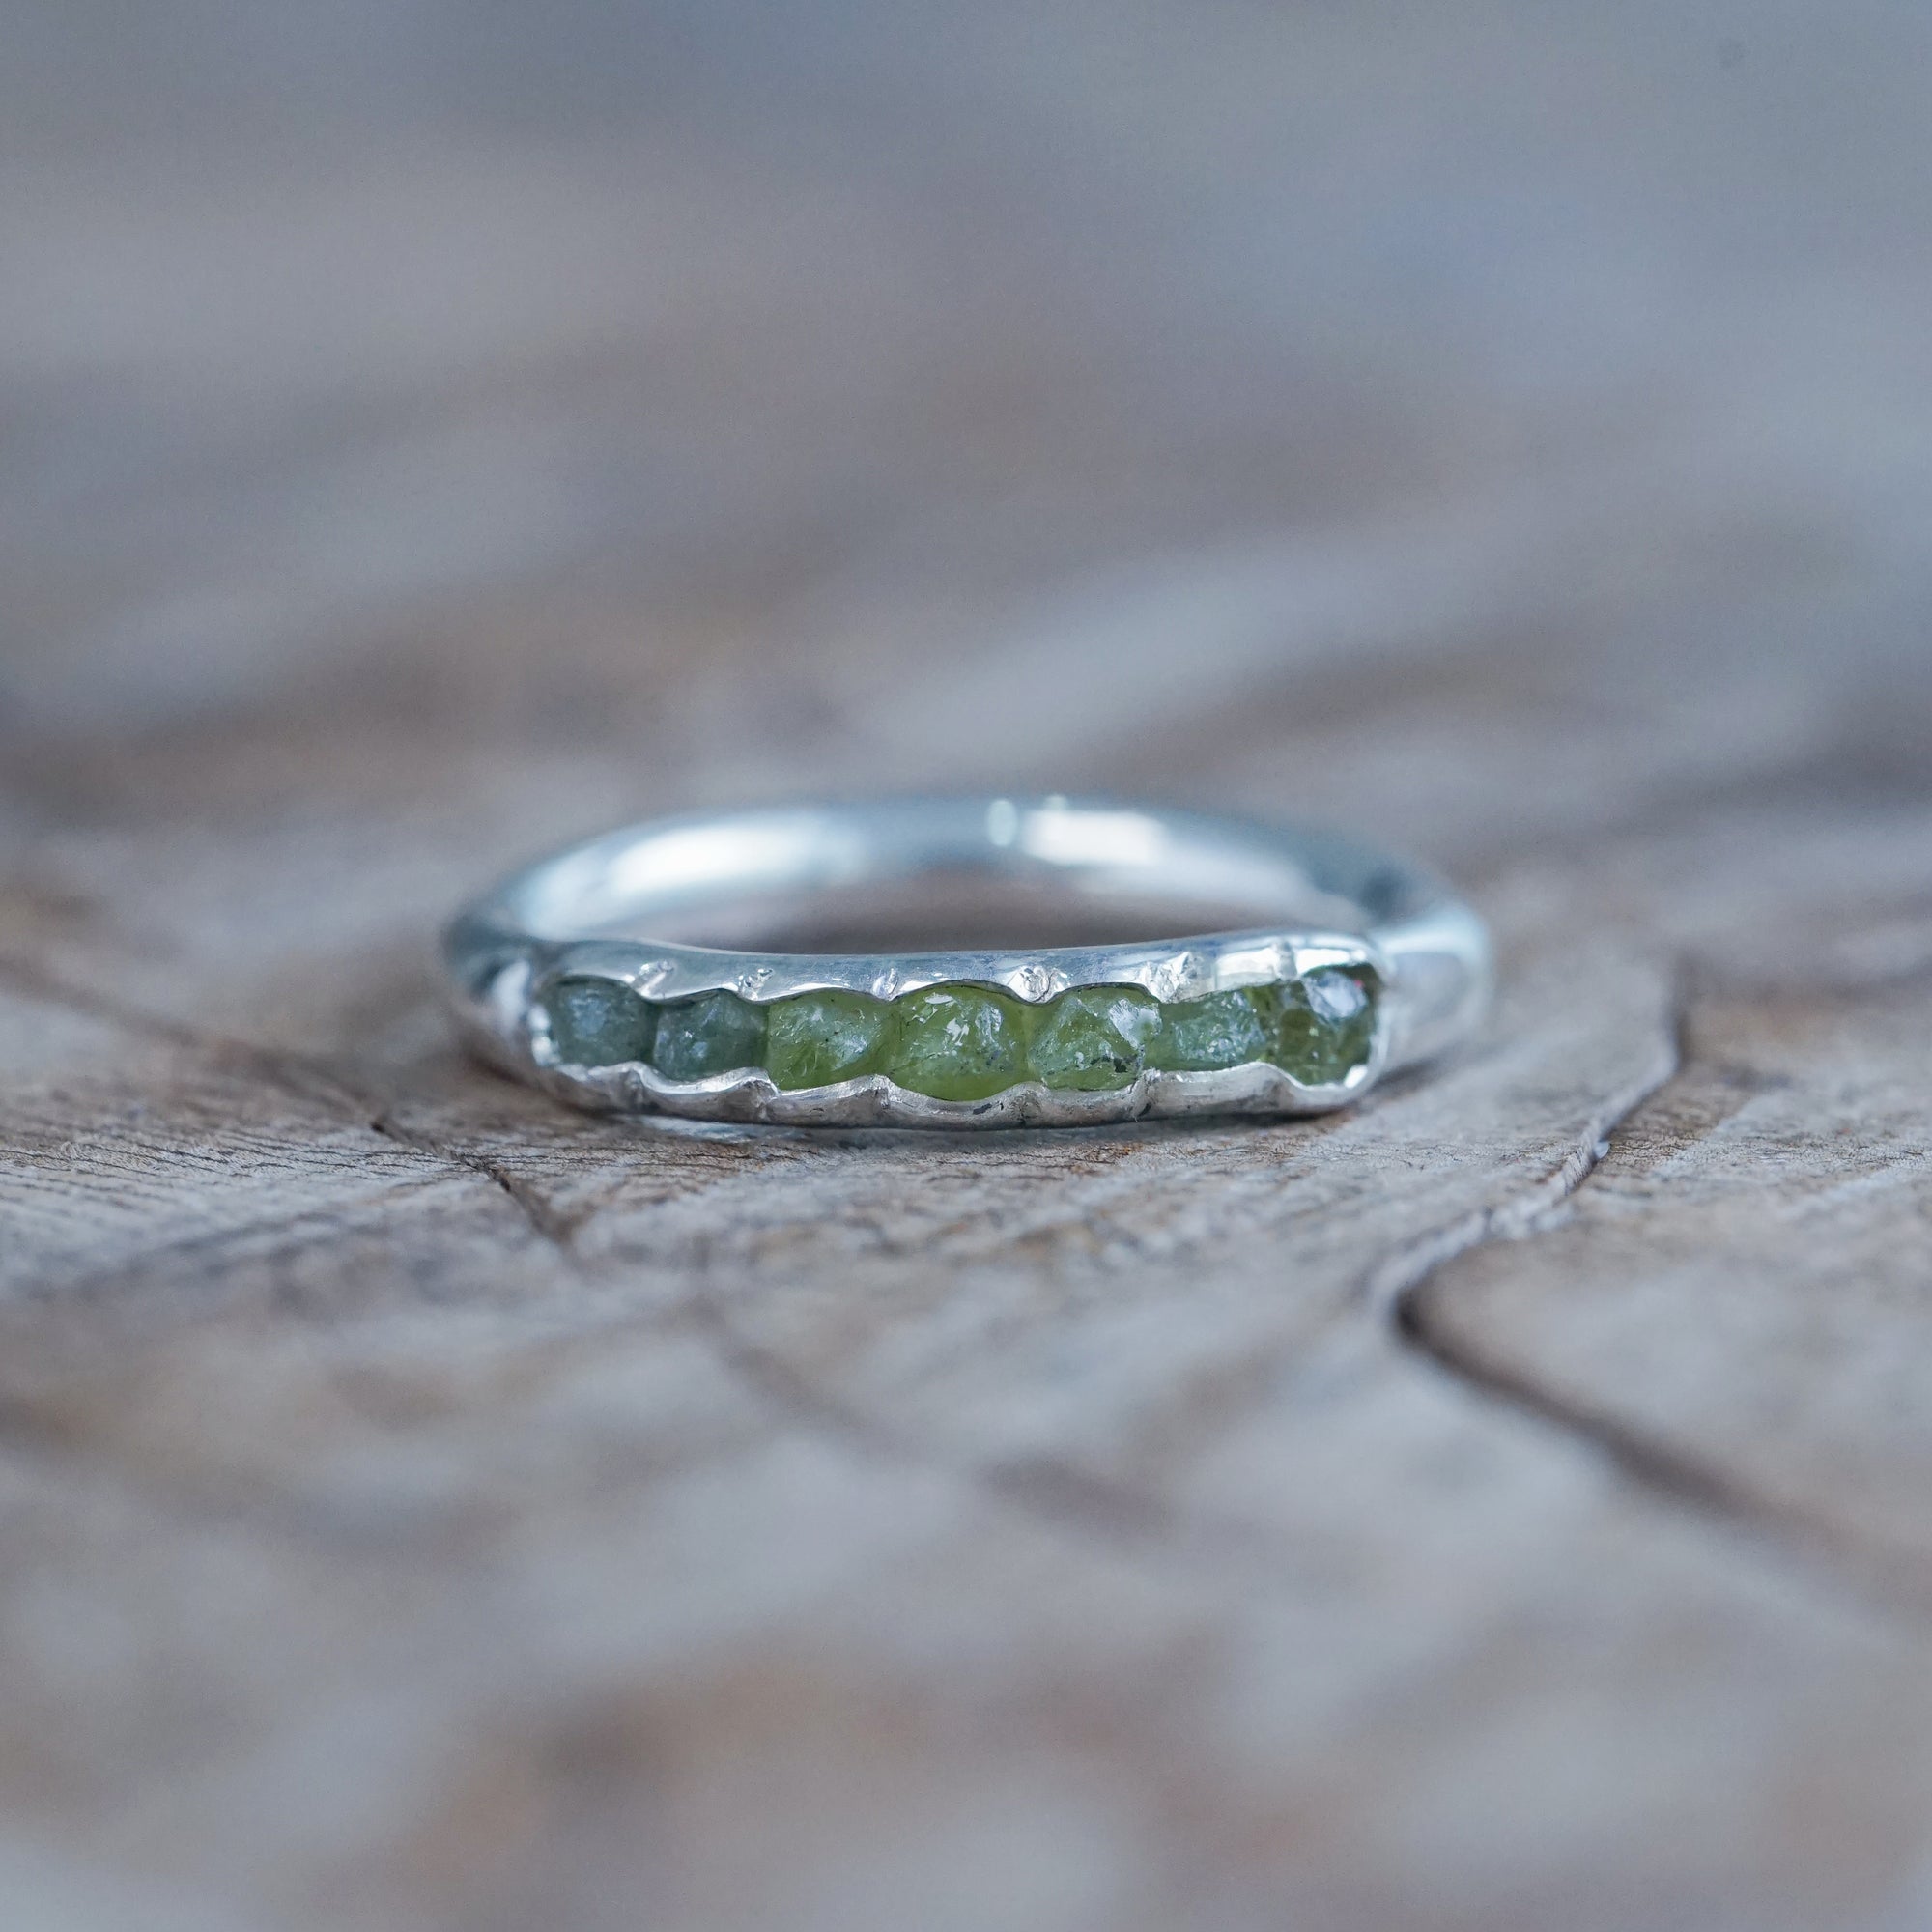 Peridot and Sapphire Hidden Gems Ring - Size 4